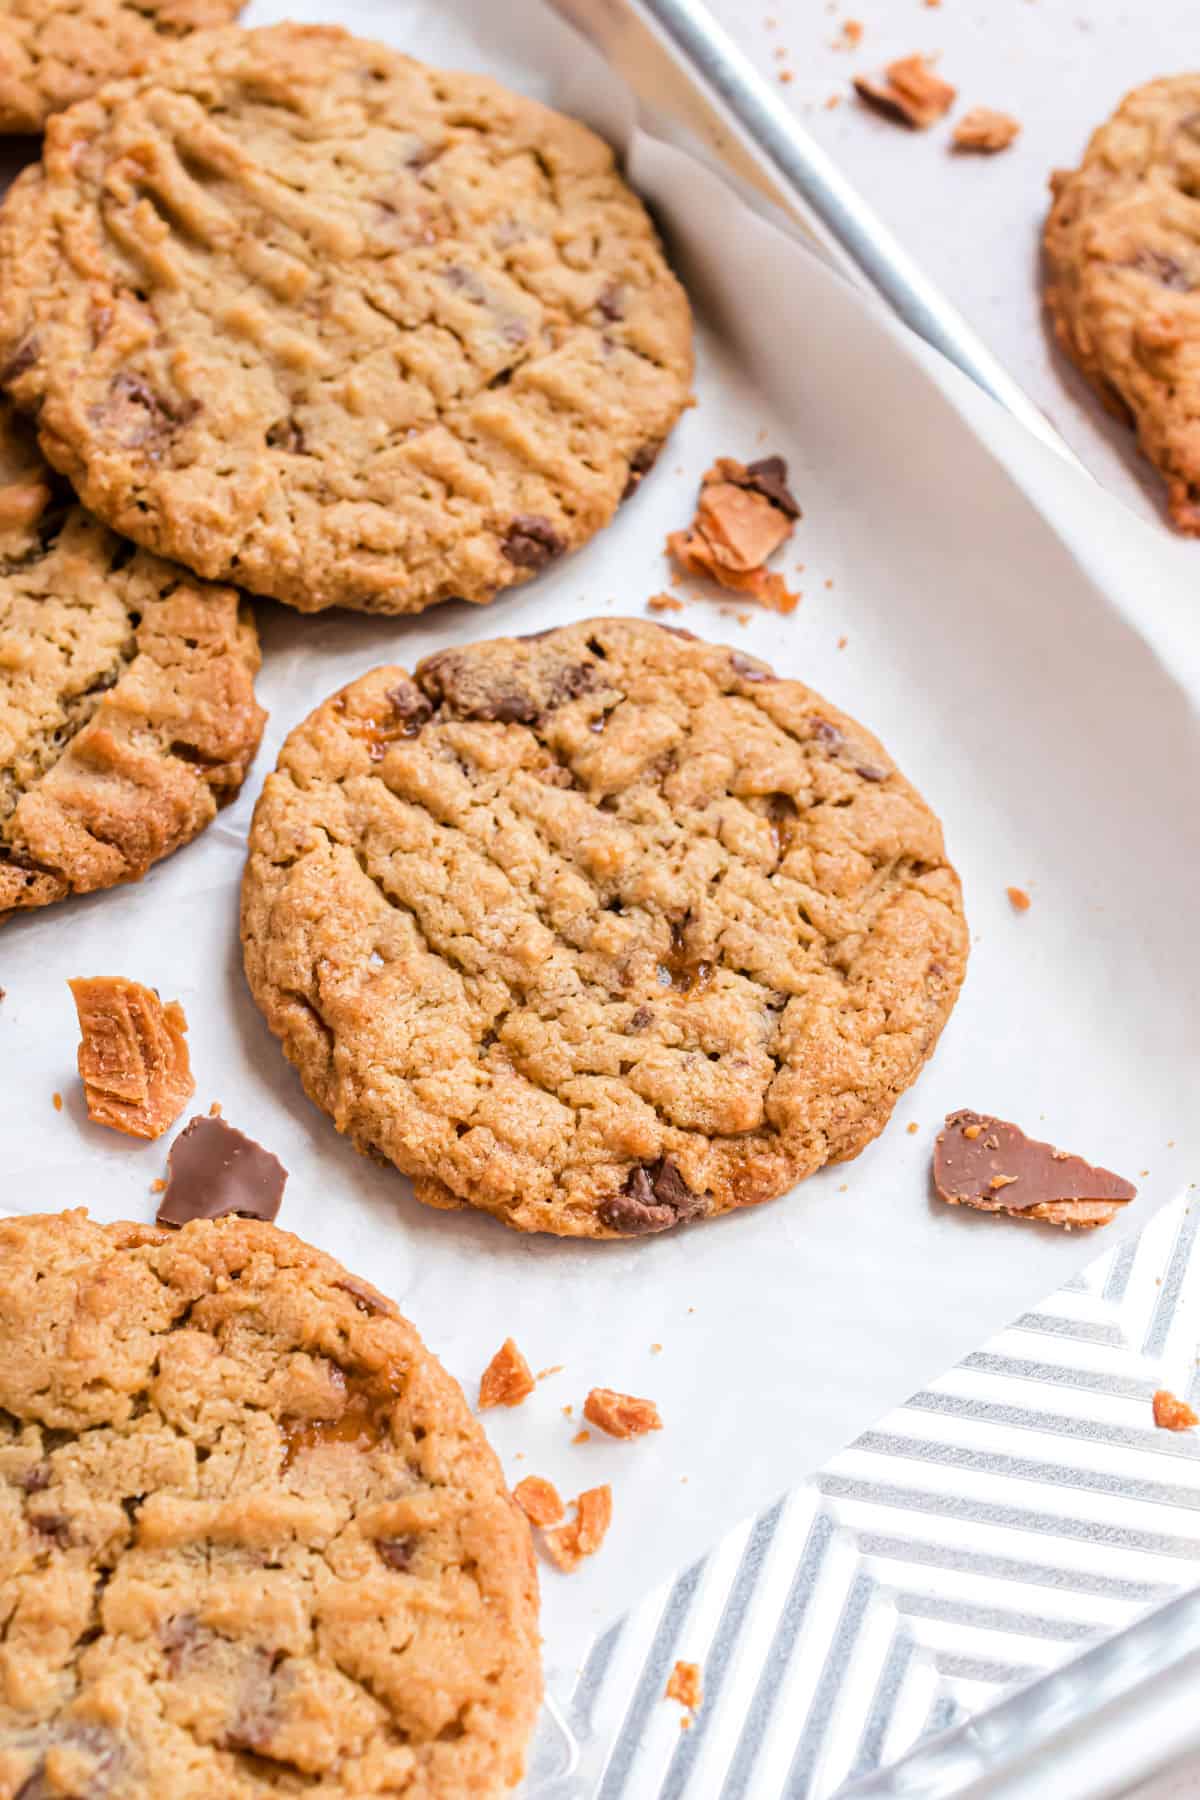 Butterfinger cookies baked on a sheet pan with parchment paper.